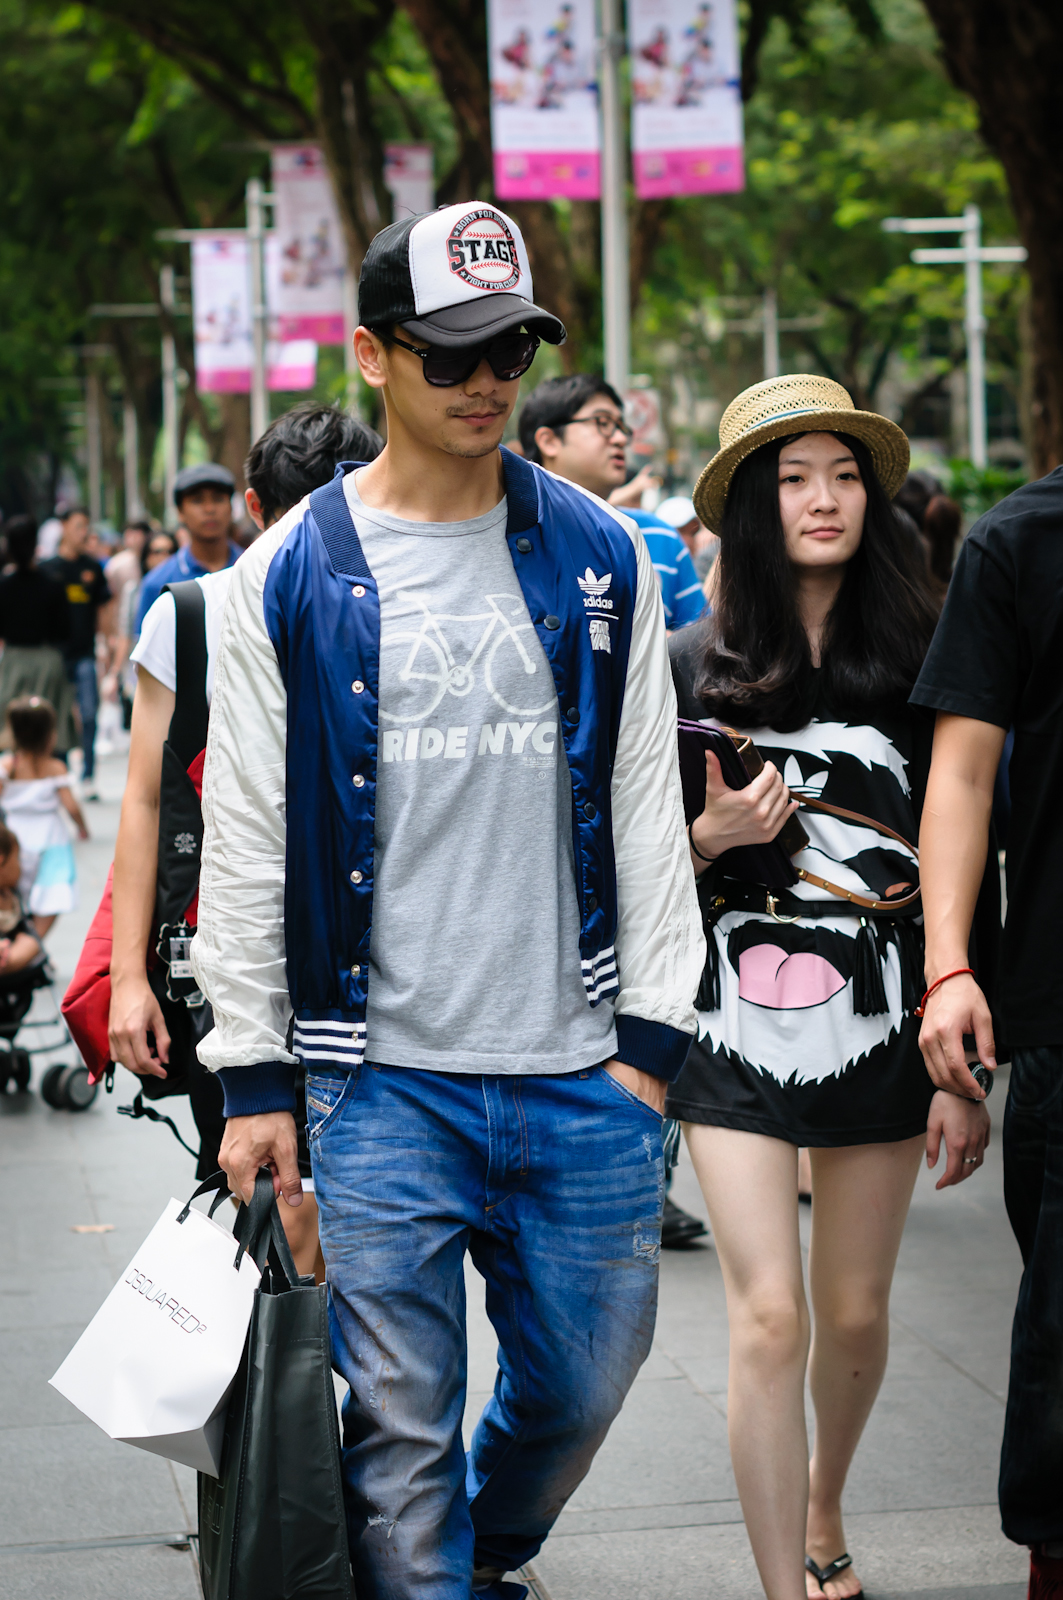 Street photography - Man in cap and woman in hat